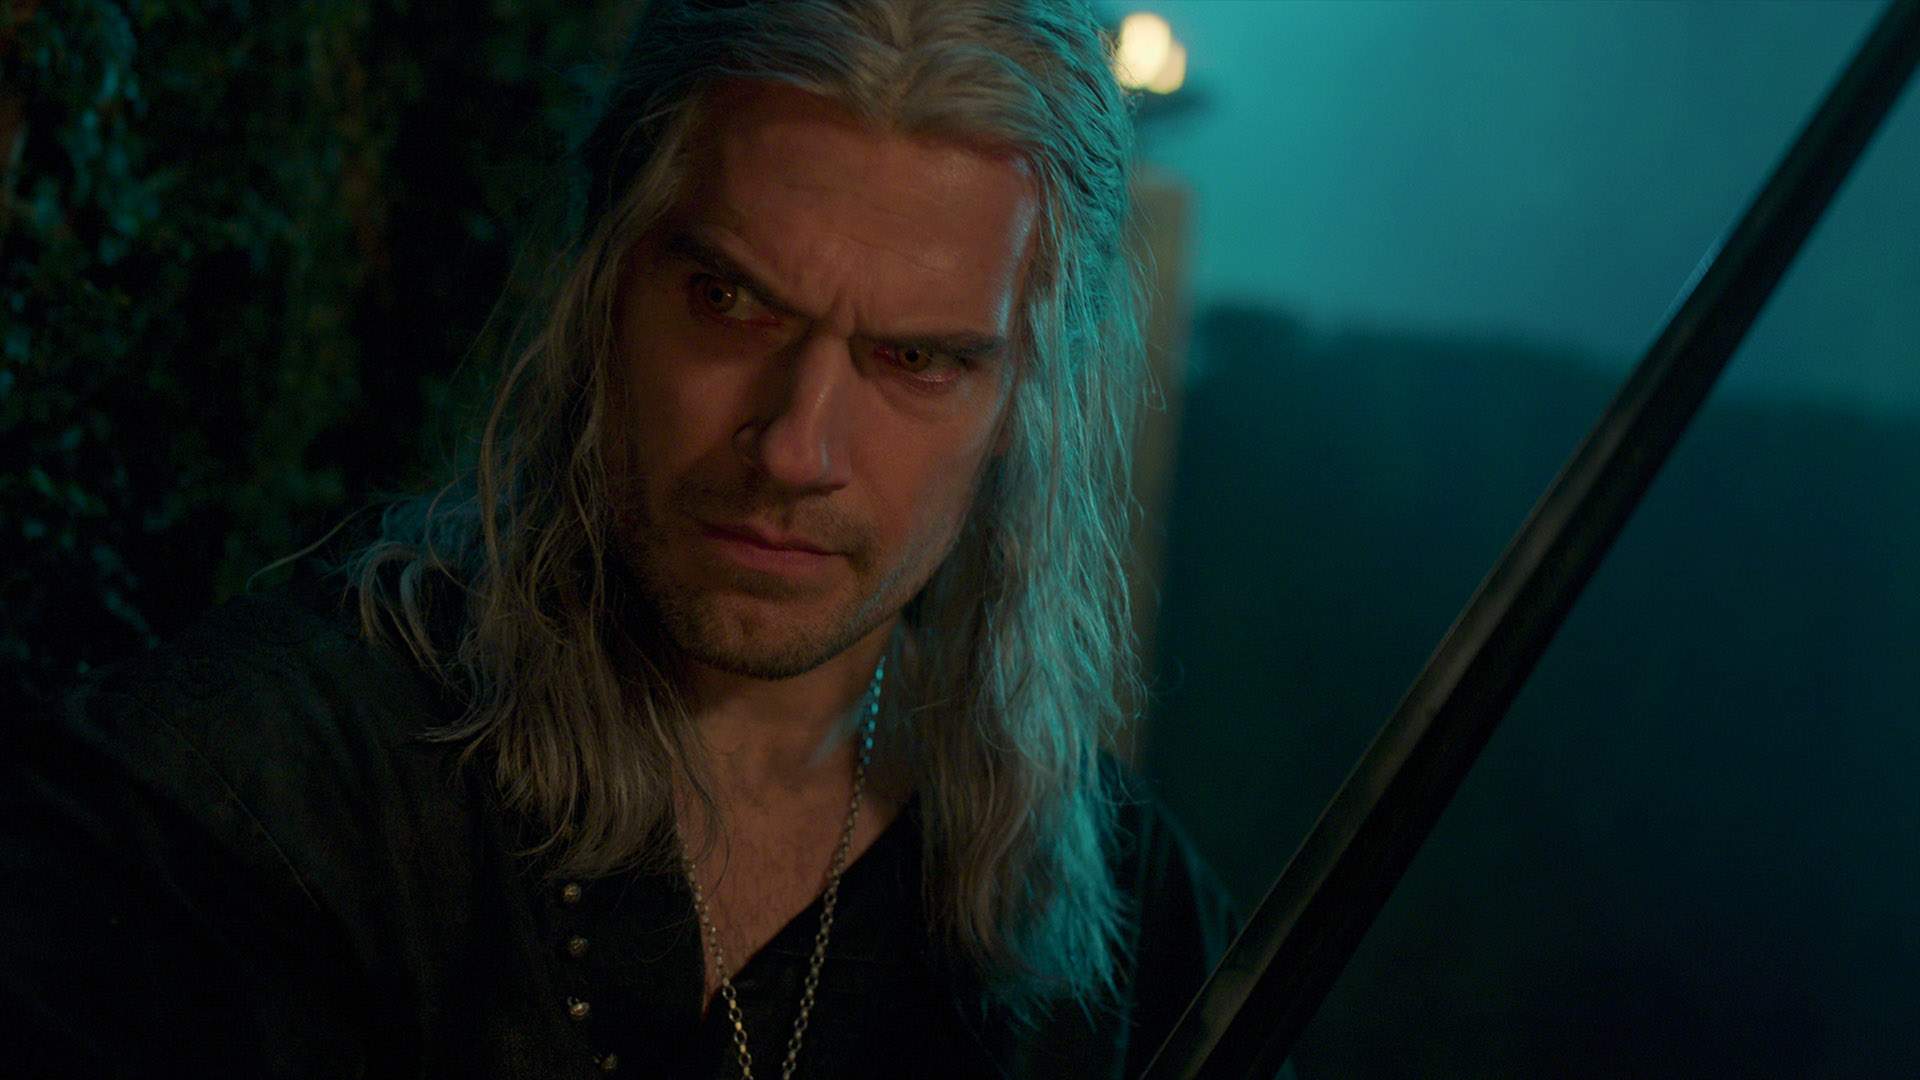 The New Trailer for Henry Cavill's Final Season of 'The Witcher' Teases a Dark and Menacing Future